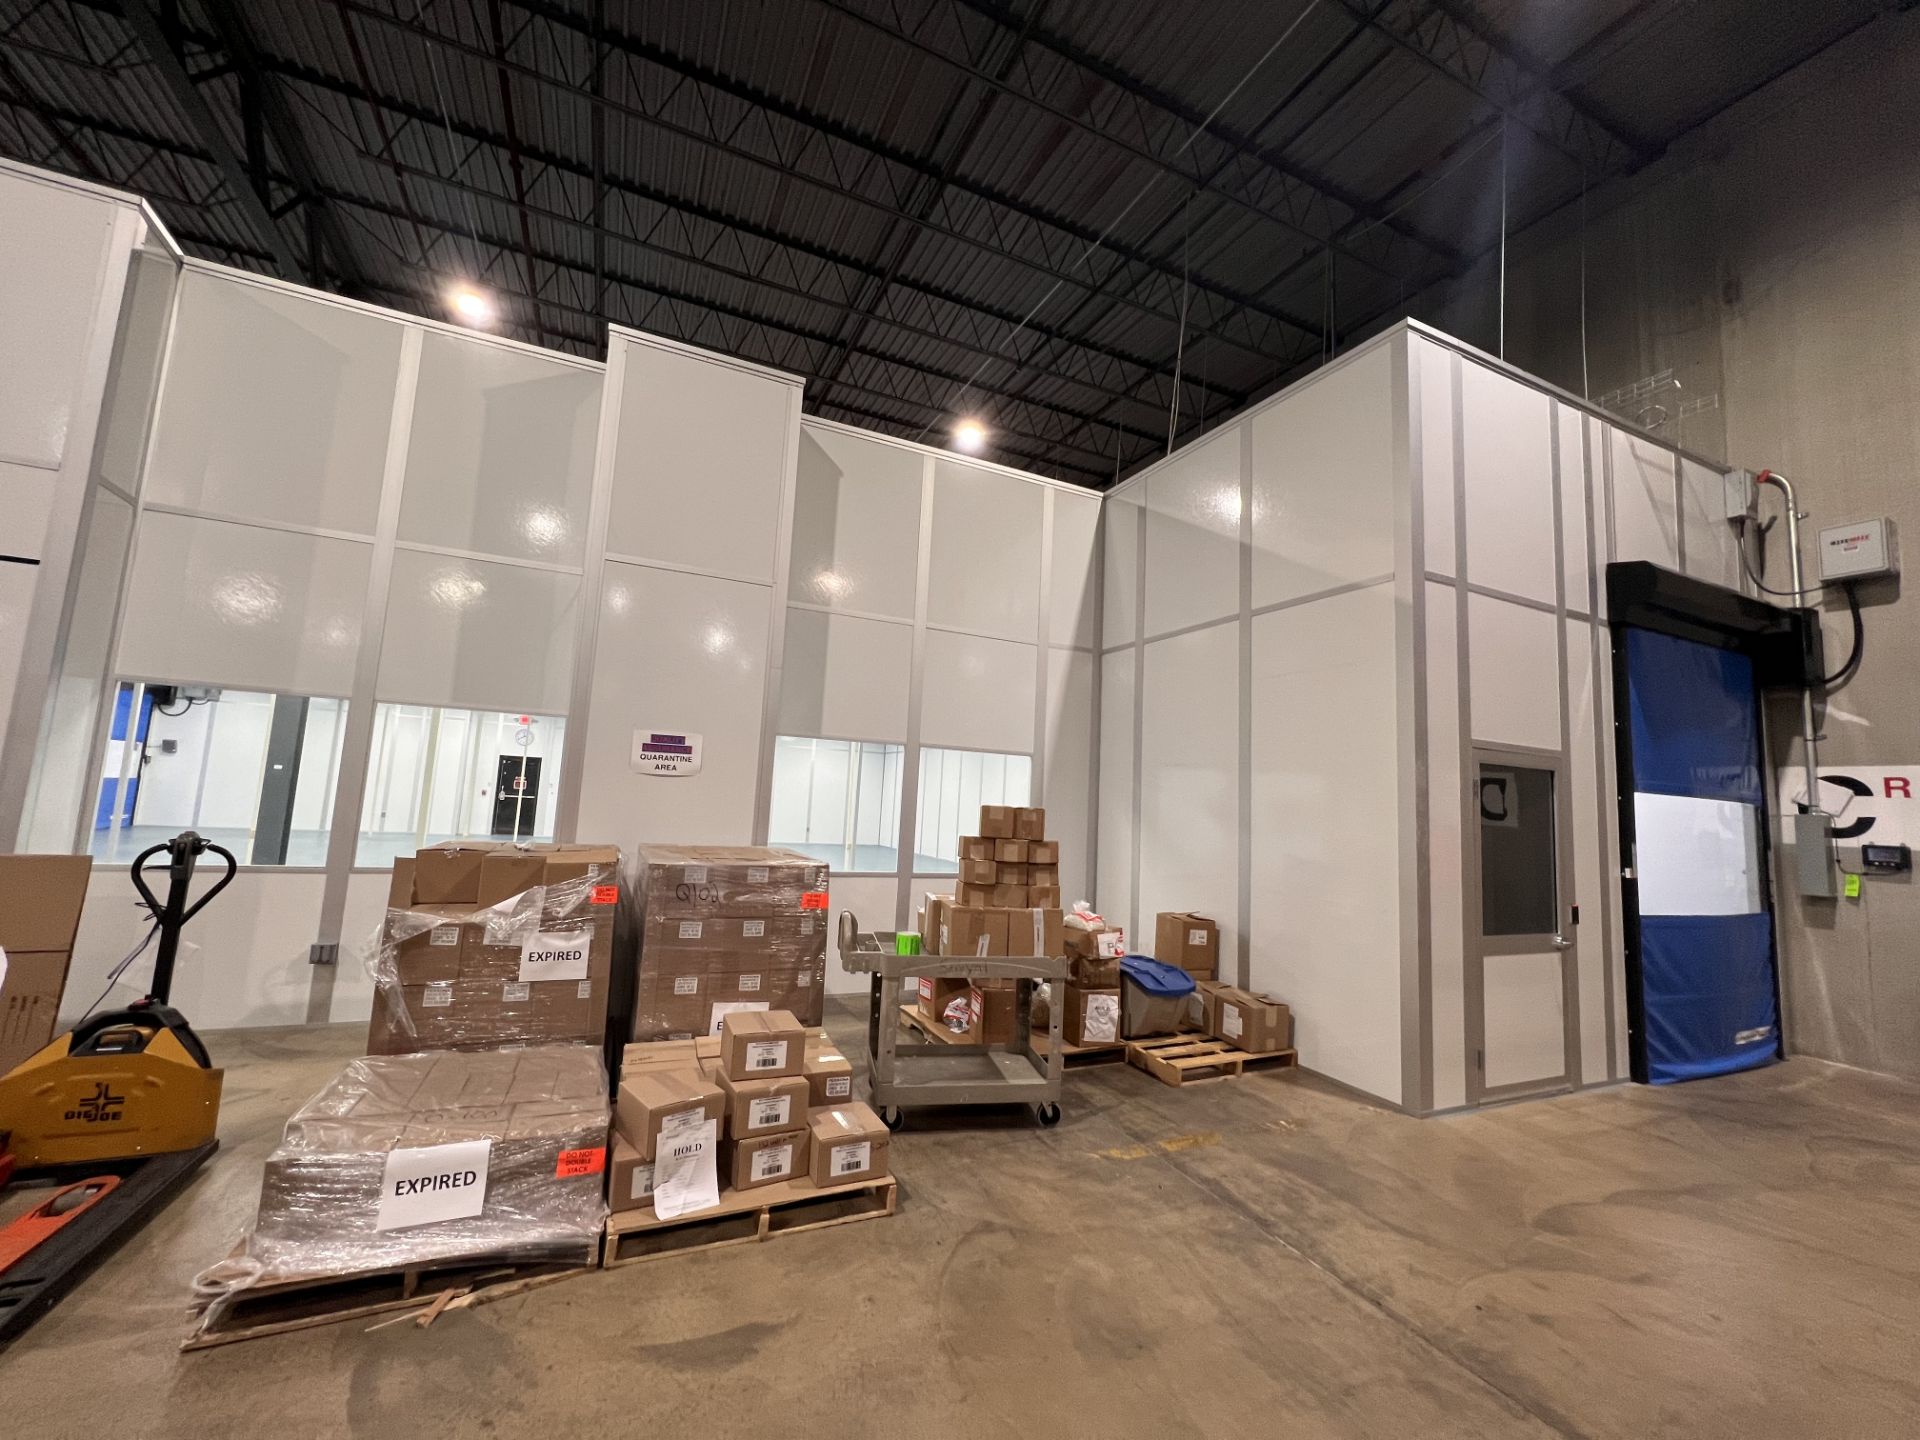 MODULAR CLEAN ROOM, APPROX. 60 FT X 60 FT X 11 FT 10 IN, INCLUDES HEPA FILTRATION UNITS